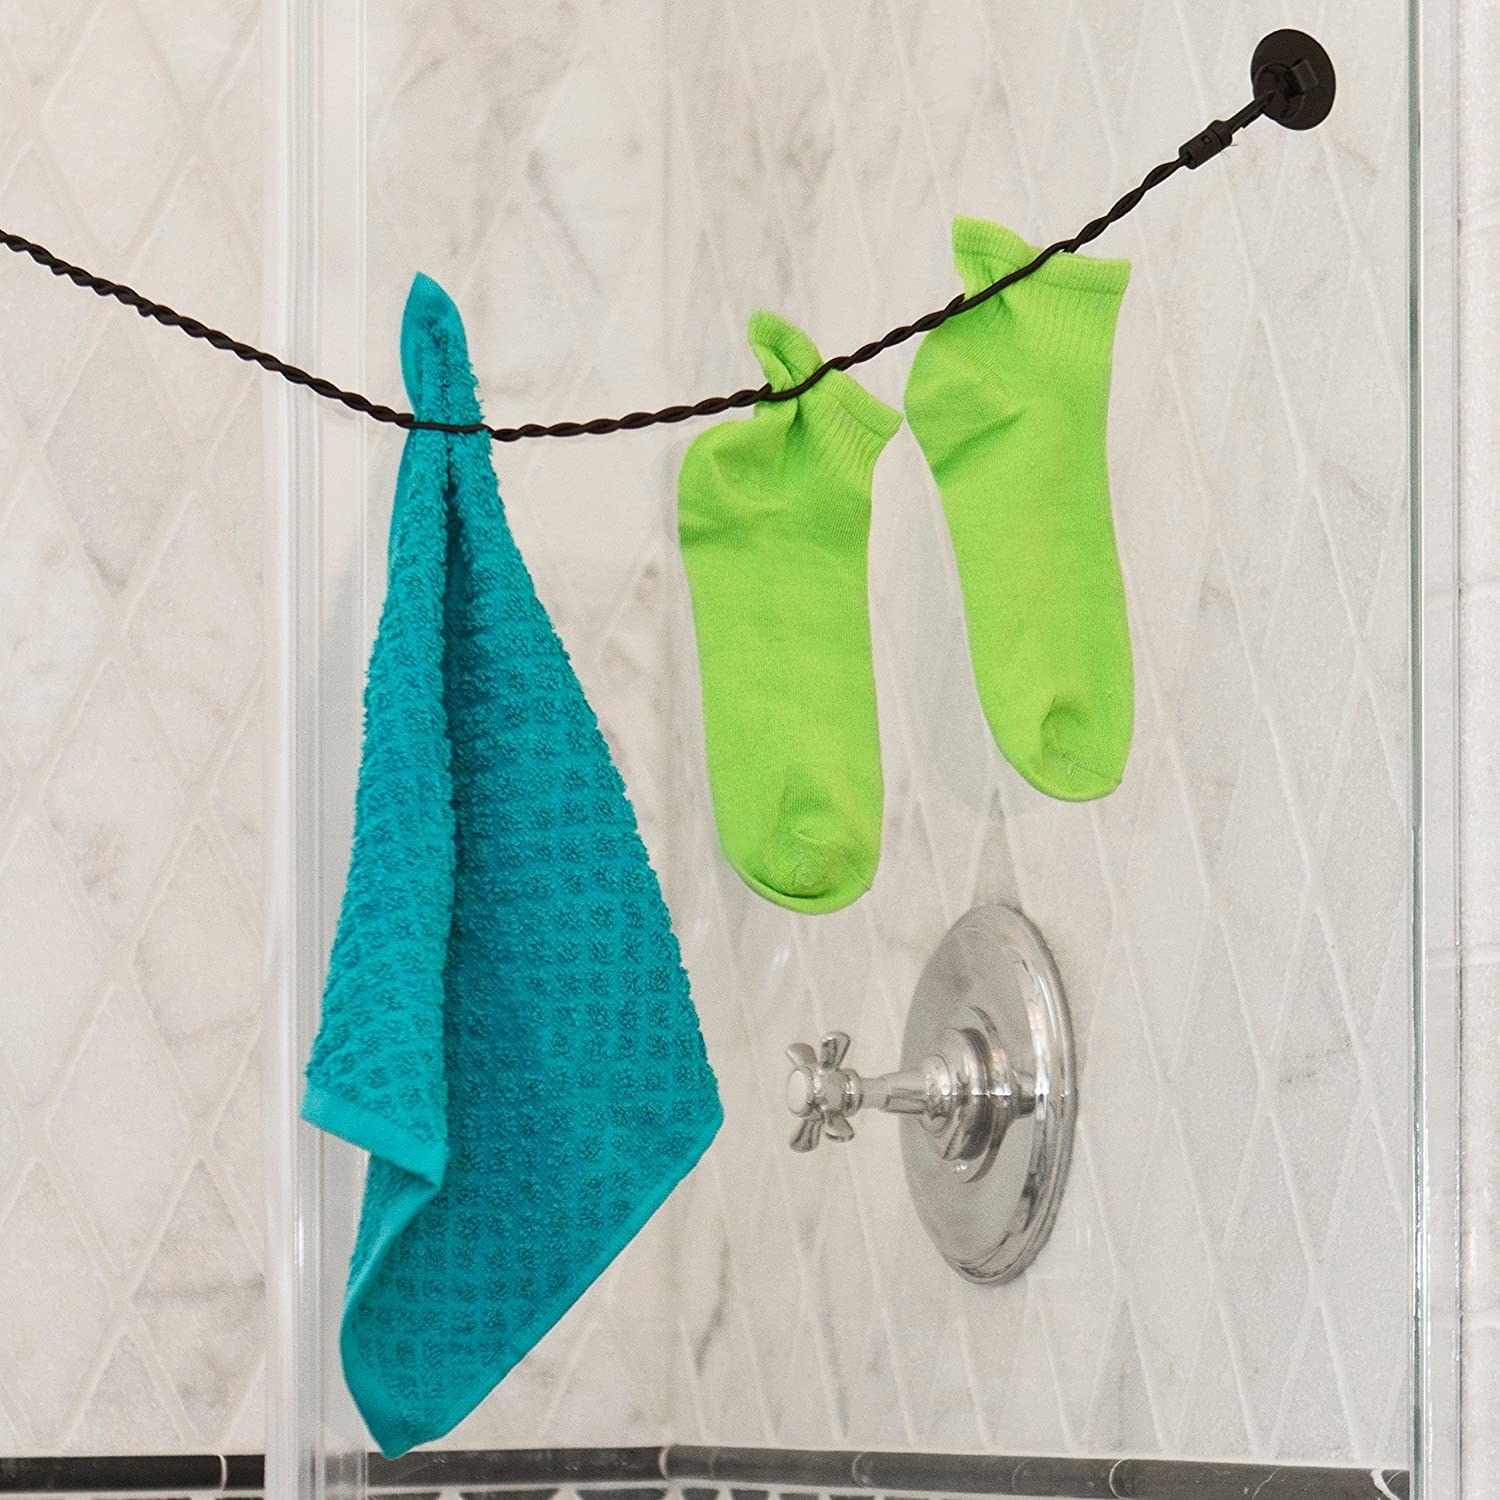 The travel clothesline hanging in a shower and holding a washcloth and a pair of socks